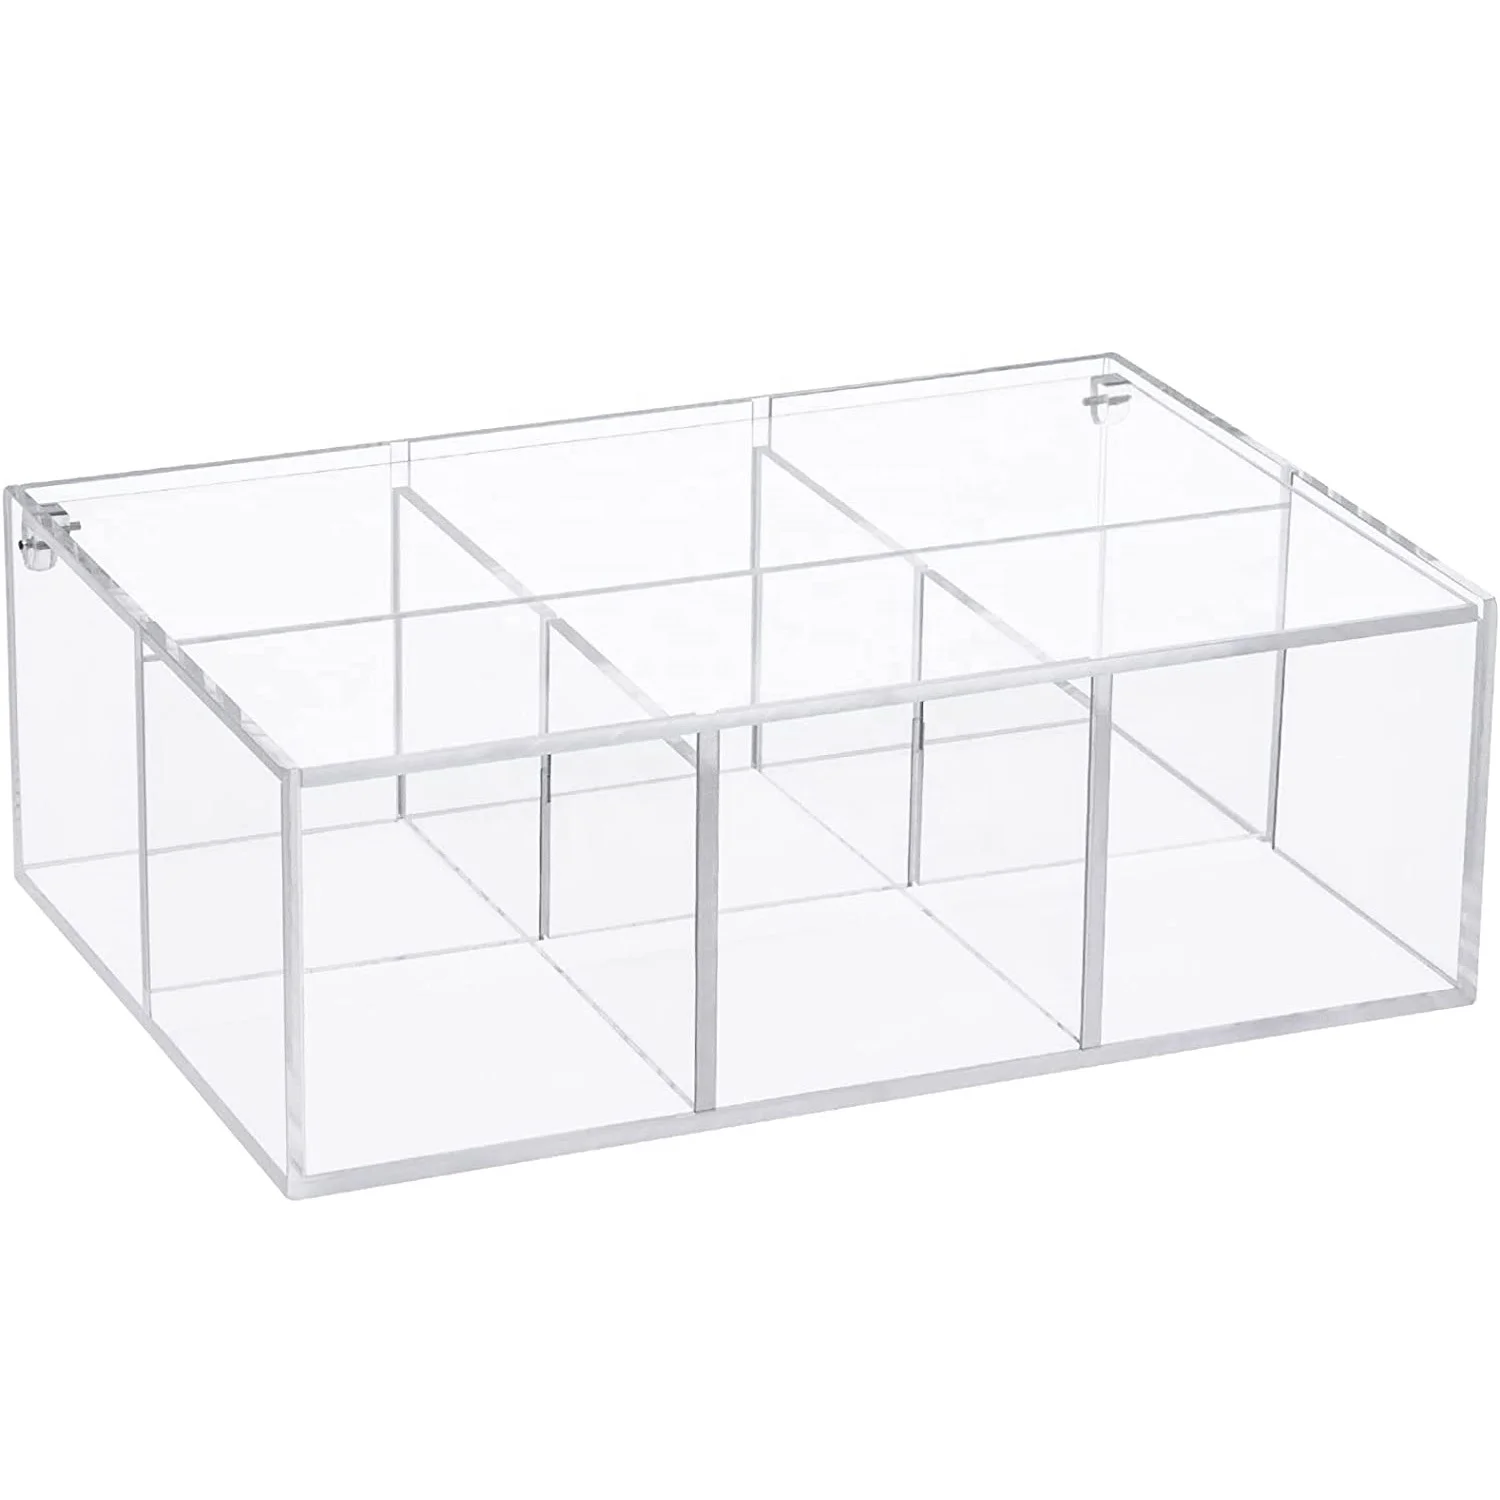 

Clear Acrylic box Holder with Lid 6 Section Drawer Box Organizer Compartment Desk Cube Contain for Jewelry Candy Coffee Make Up